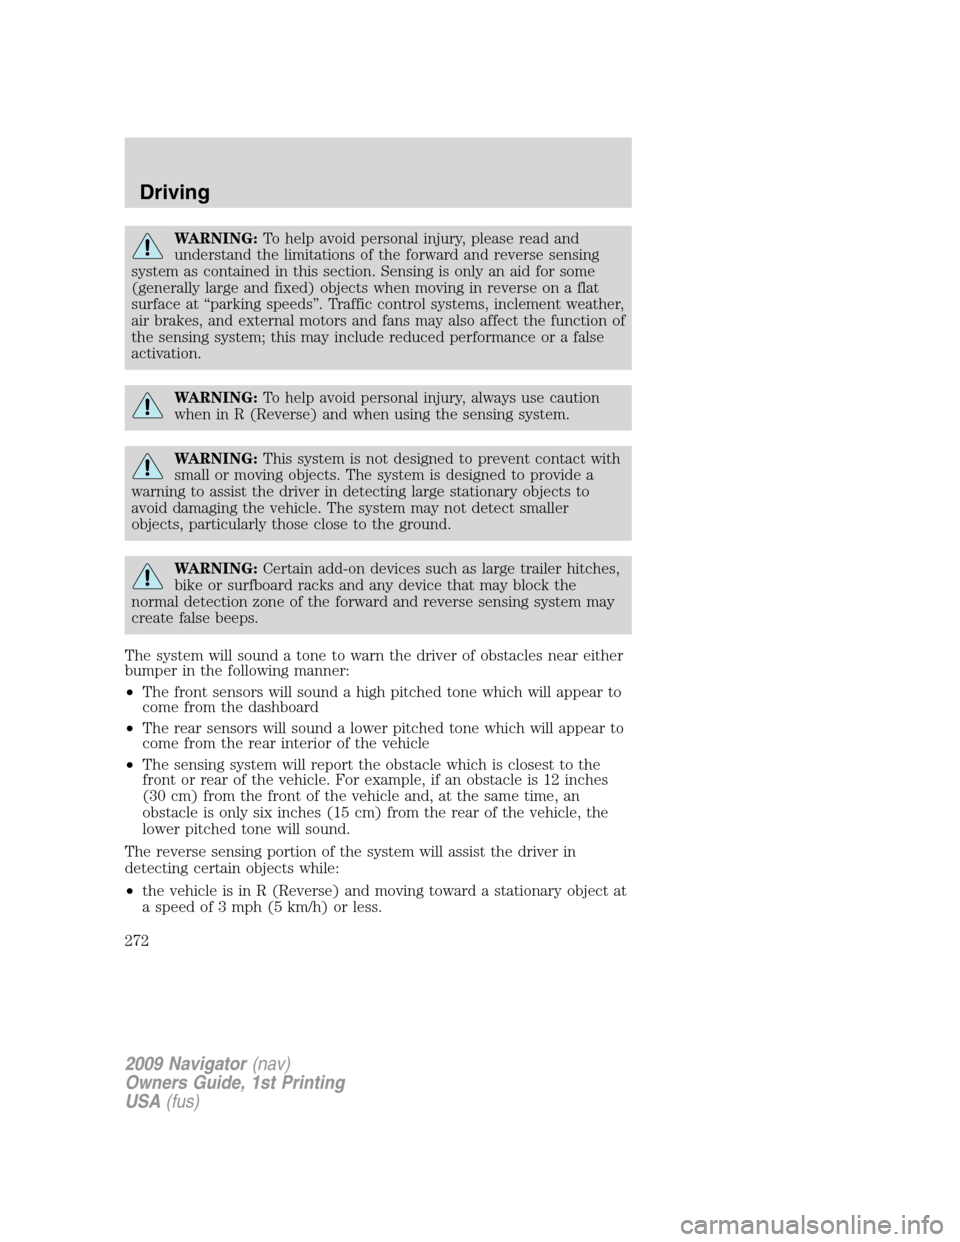 LINCOLN NAVIGATOR 2009 User Guide WARNING:To help avoid personal injury, please read and
understand the limitations of the forward and reverse sensing
system as contained in this section. Sensing is only an aid for some
(generally lar